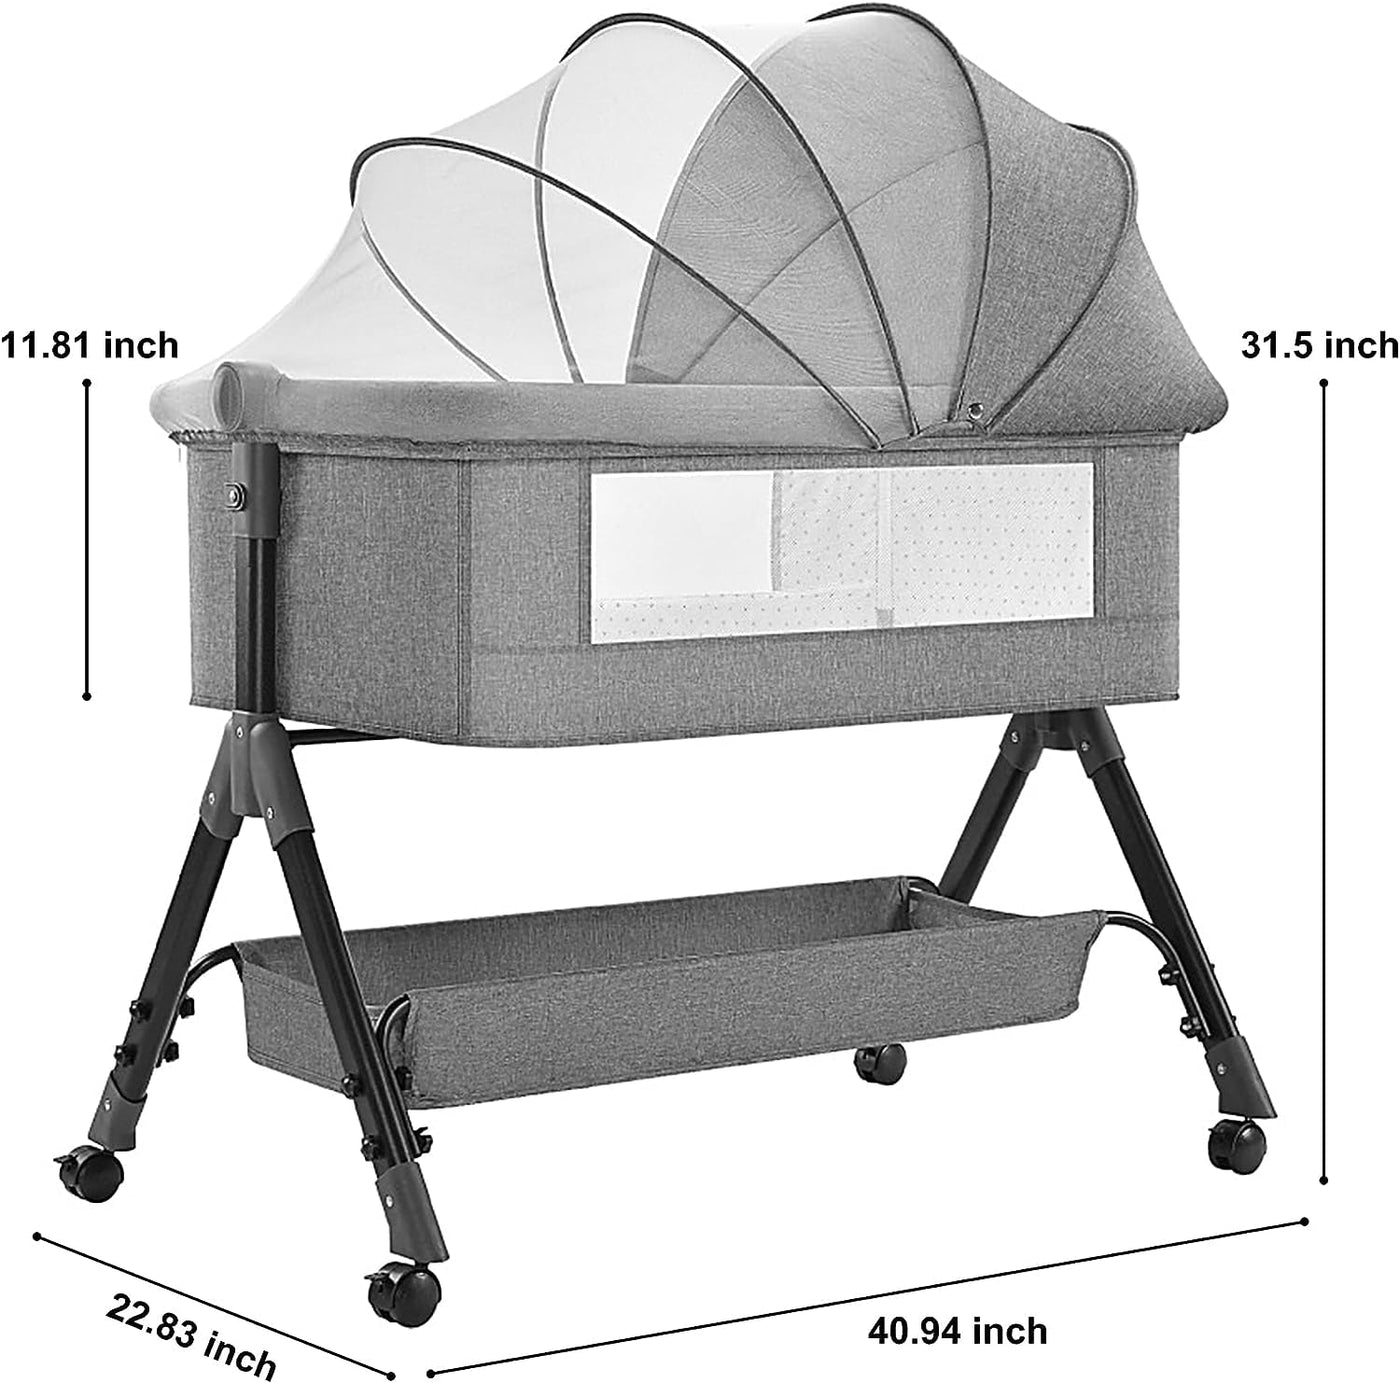 3 in 1 Baby Bed Portable Bassinet for Newborn Infant Baby with Storage Basket - (Charcoal)